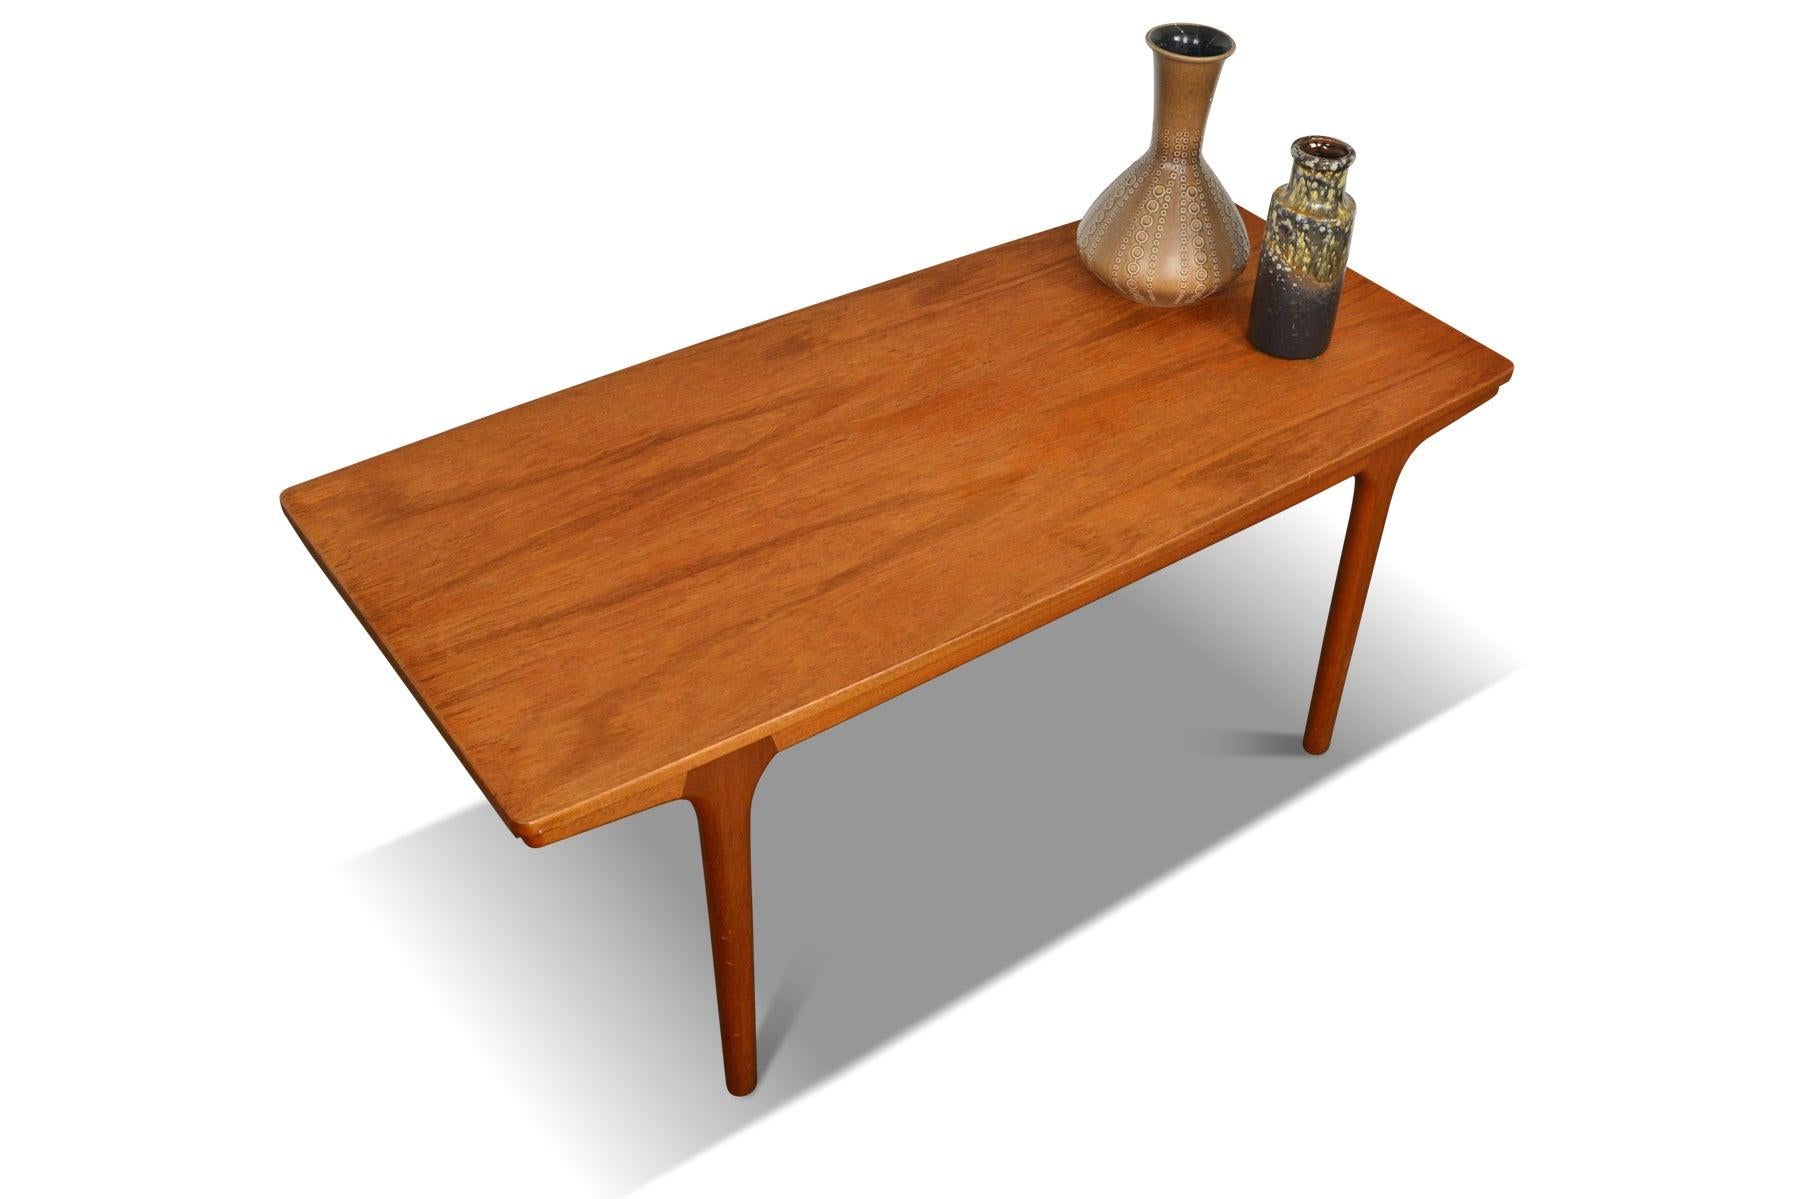 A.H. Mcintosh Teak Surfboard Coffee Table with Pullout Drink Trays #1 3